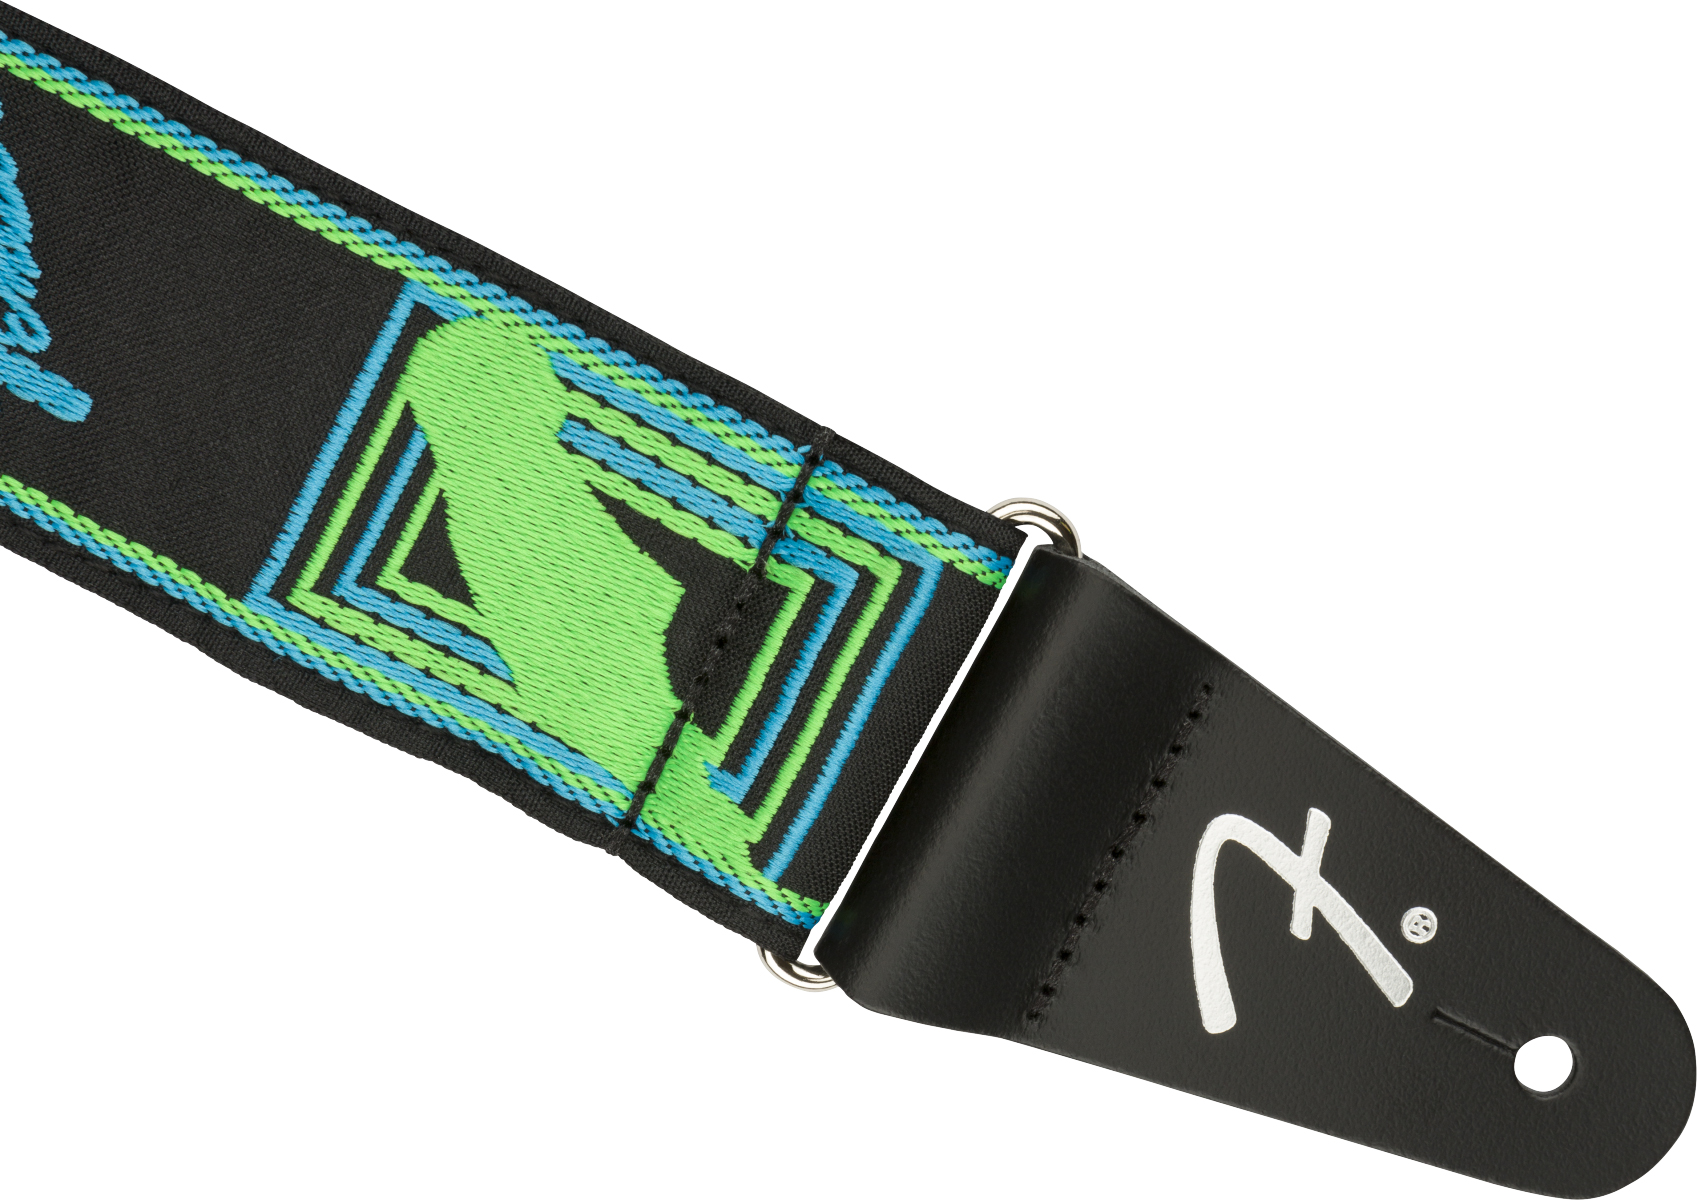 Fender Neon Monogrammed Guitar Strap Poly Green/blue - Sangle Courroie - Variation 1